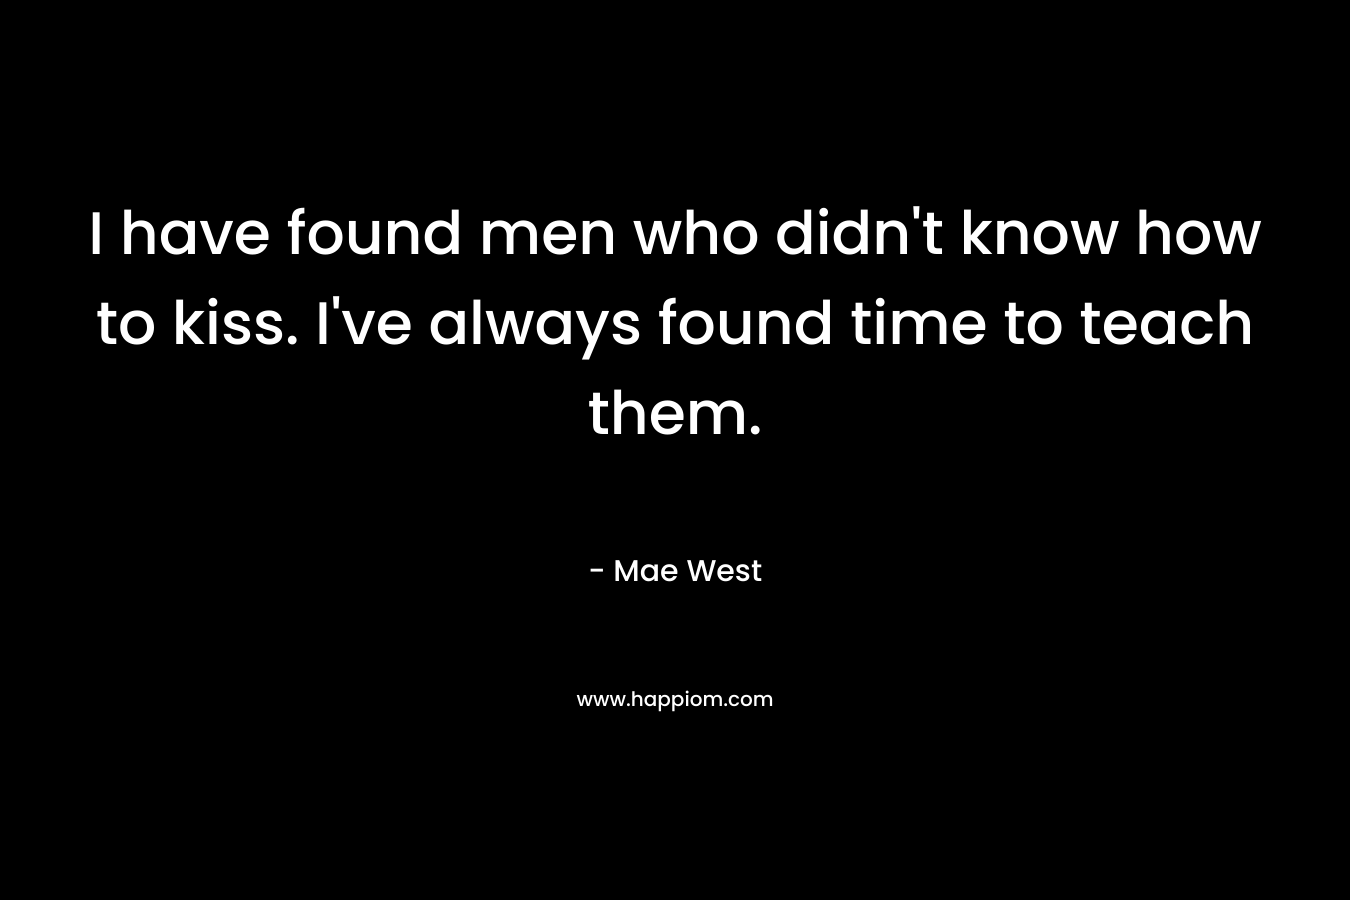 I have found men who didn’t know how to kiss. I’ve always found time to teach them. – Mae West